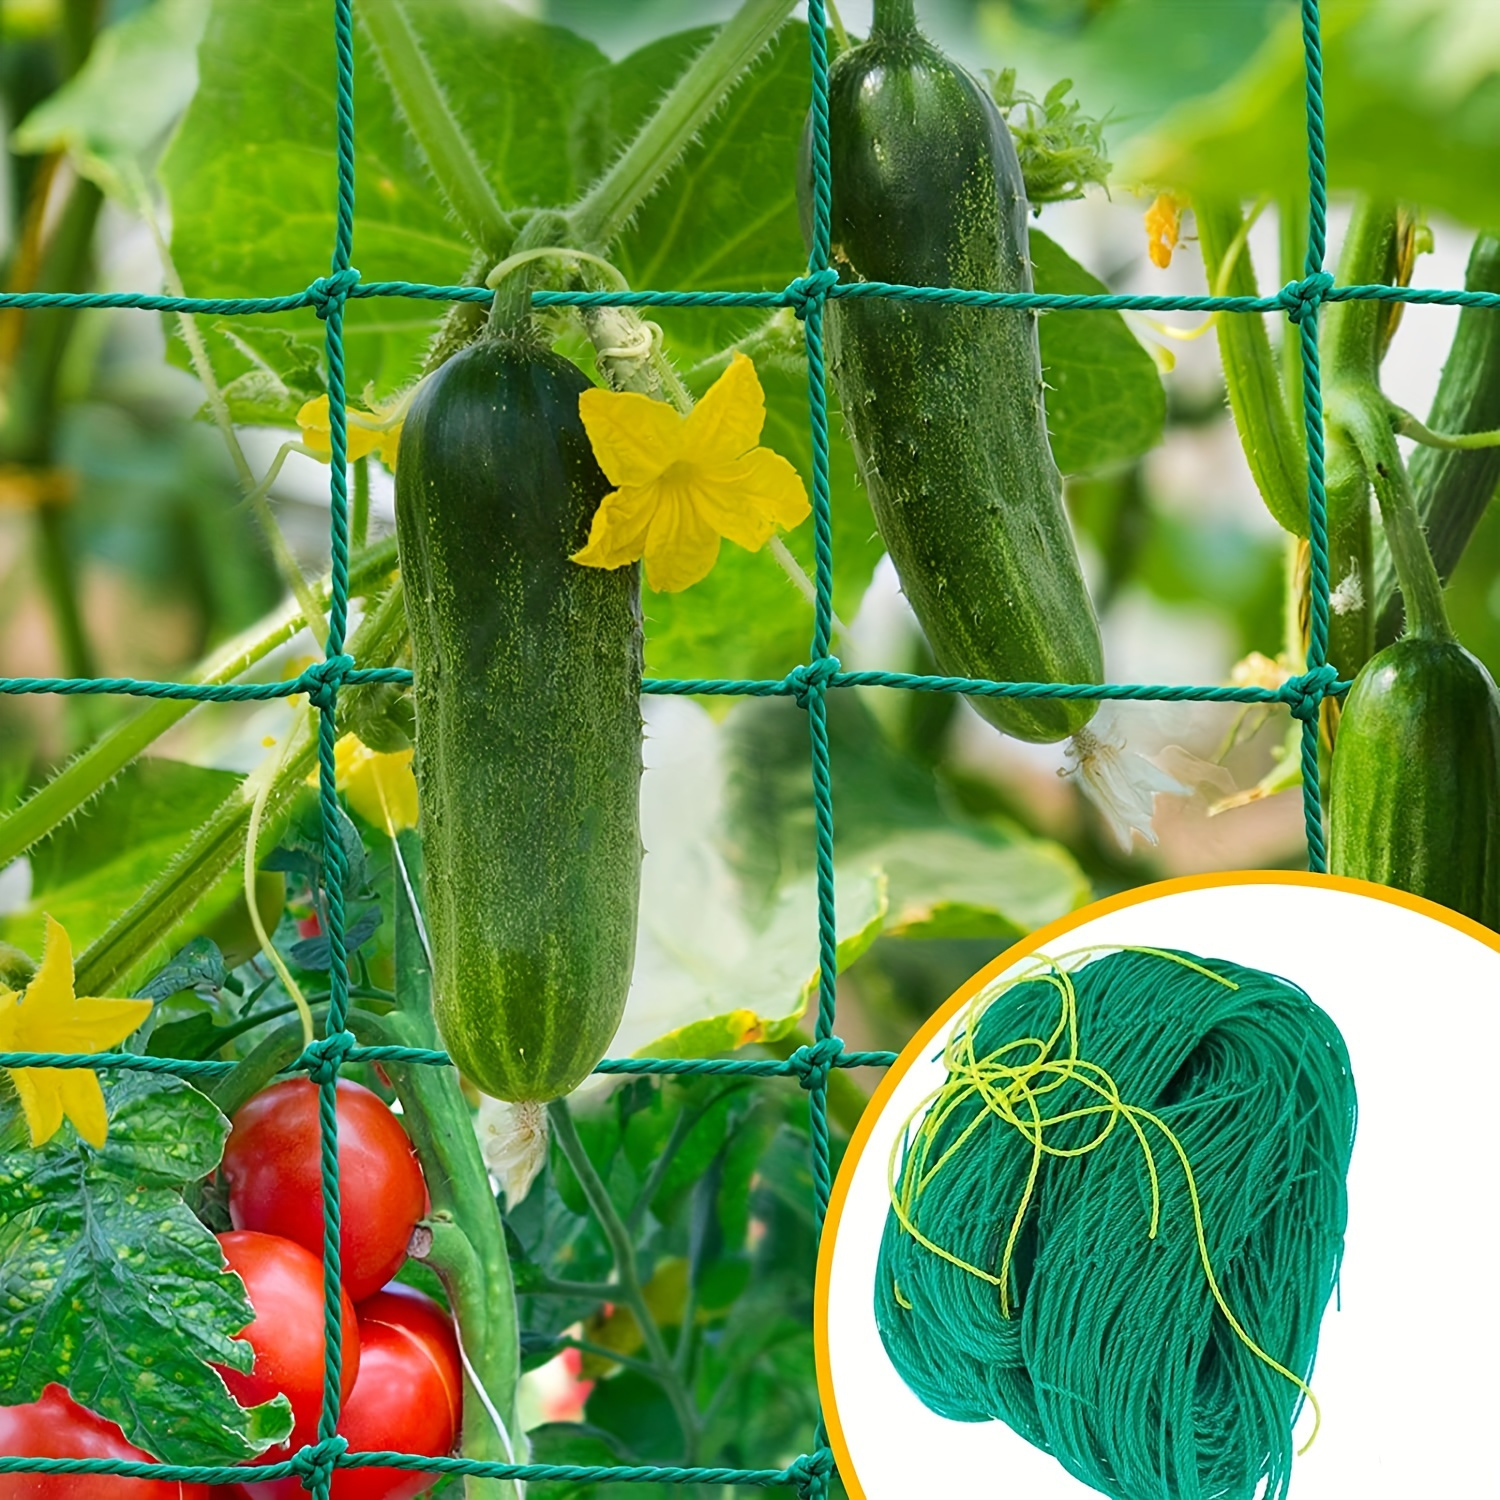 

Durable Outdoor Garden Trellis Netting For Climbing Plants - 6.5x9.8ft, Perfect For Cucumbers, Tomatoes, Grapes & Beans, Easy-to-use 4x4 Inch Mesh Support